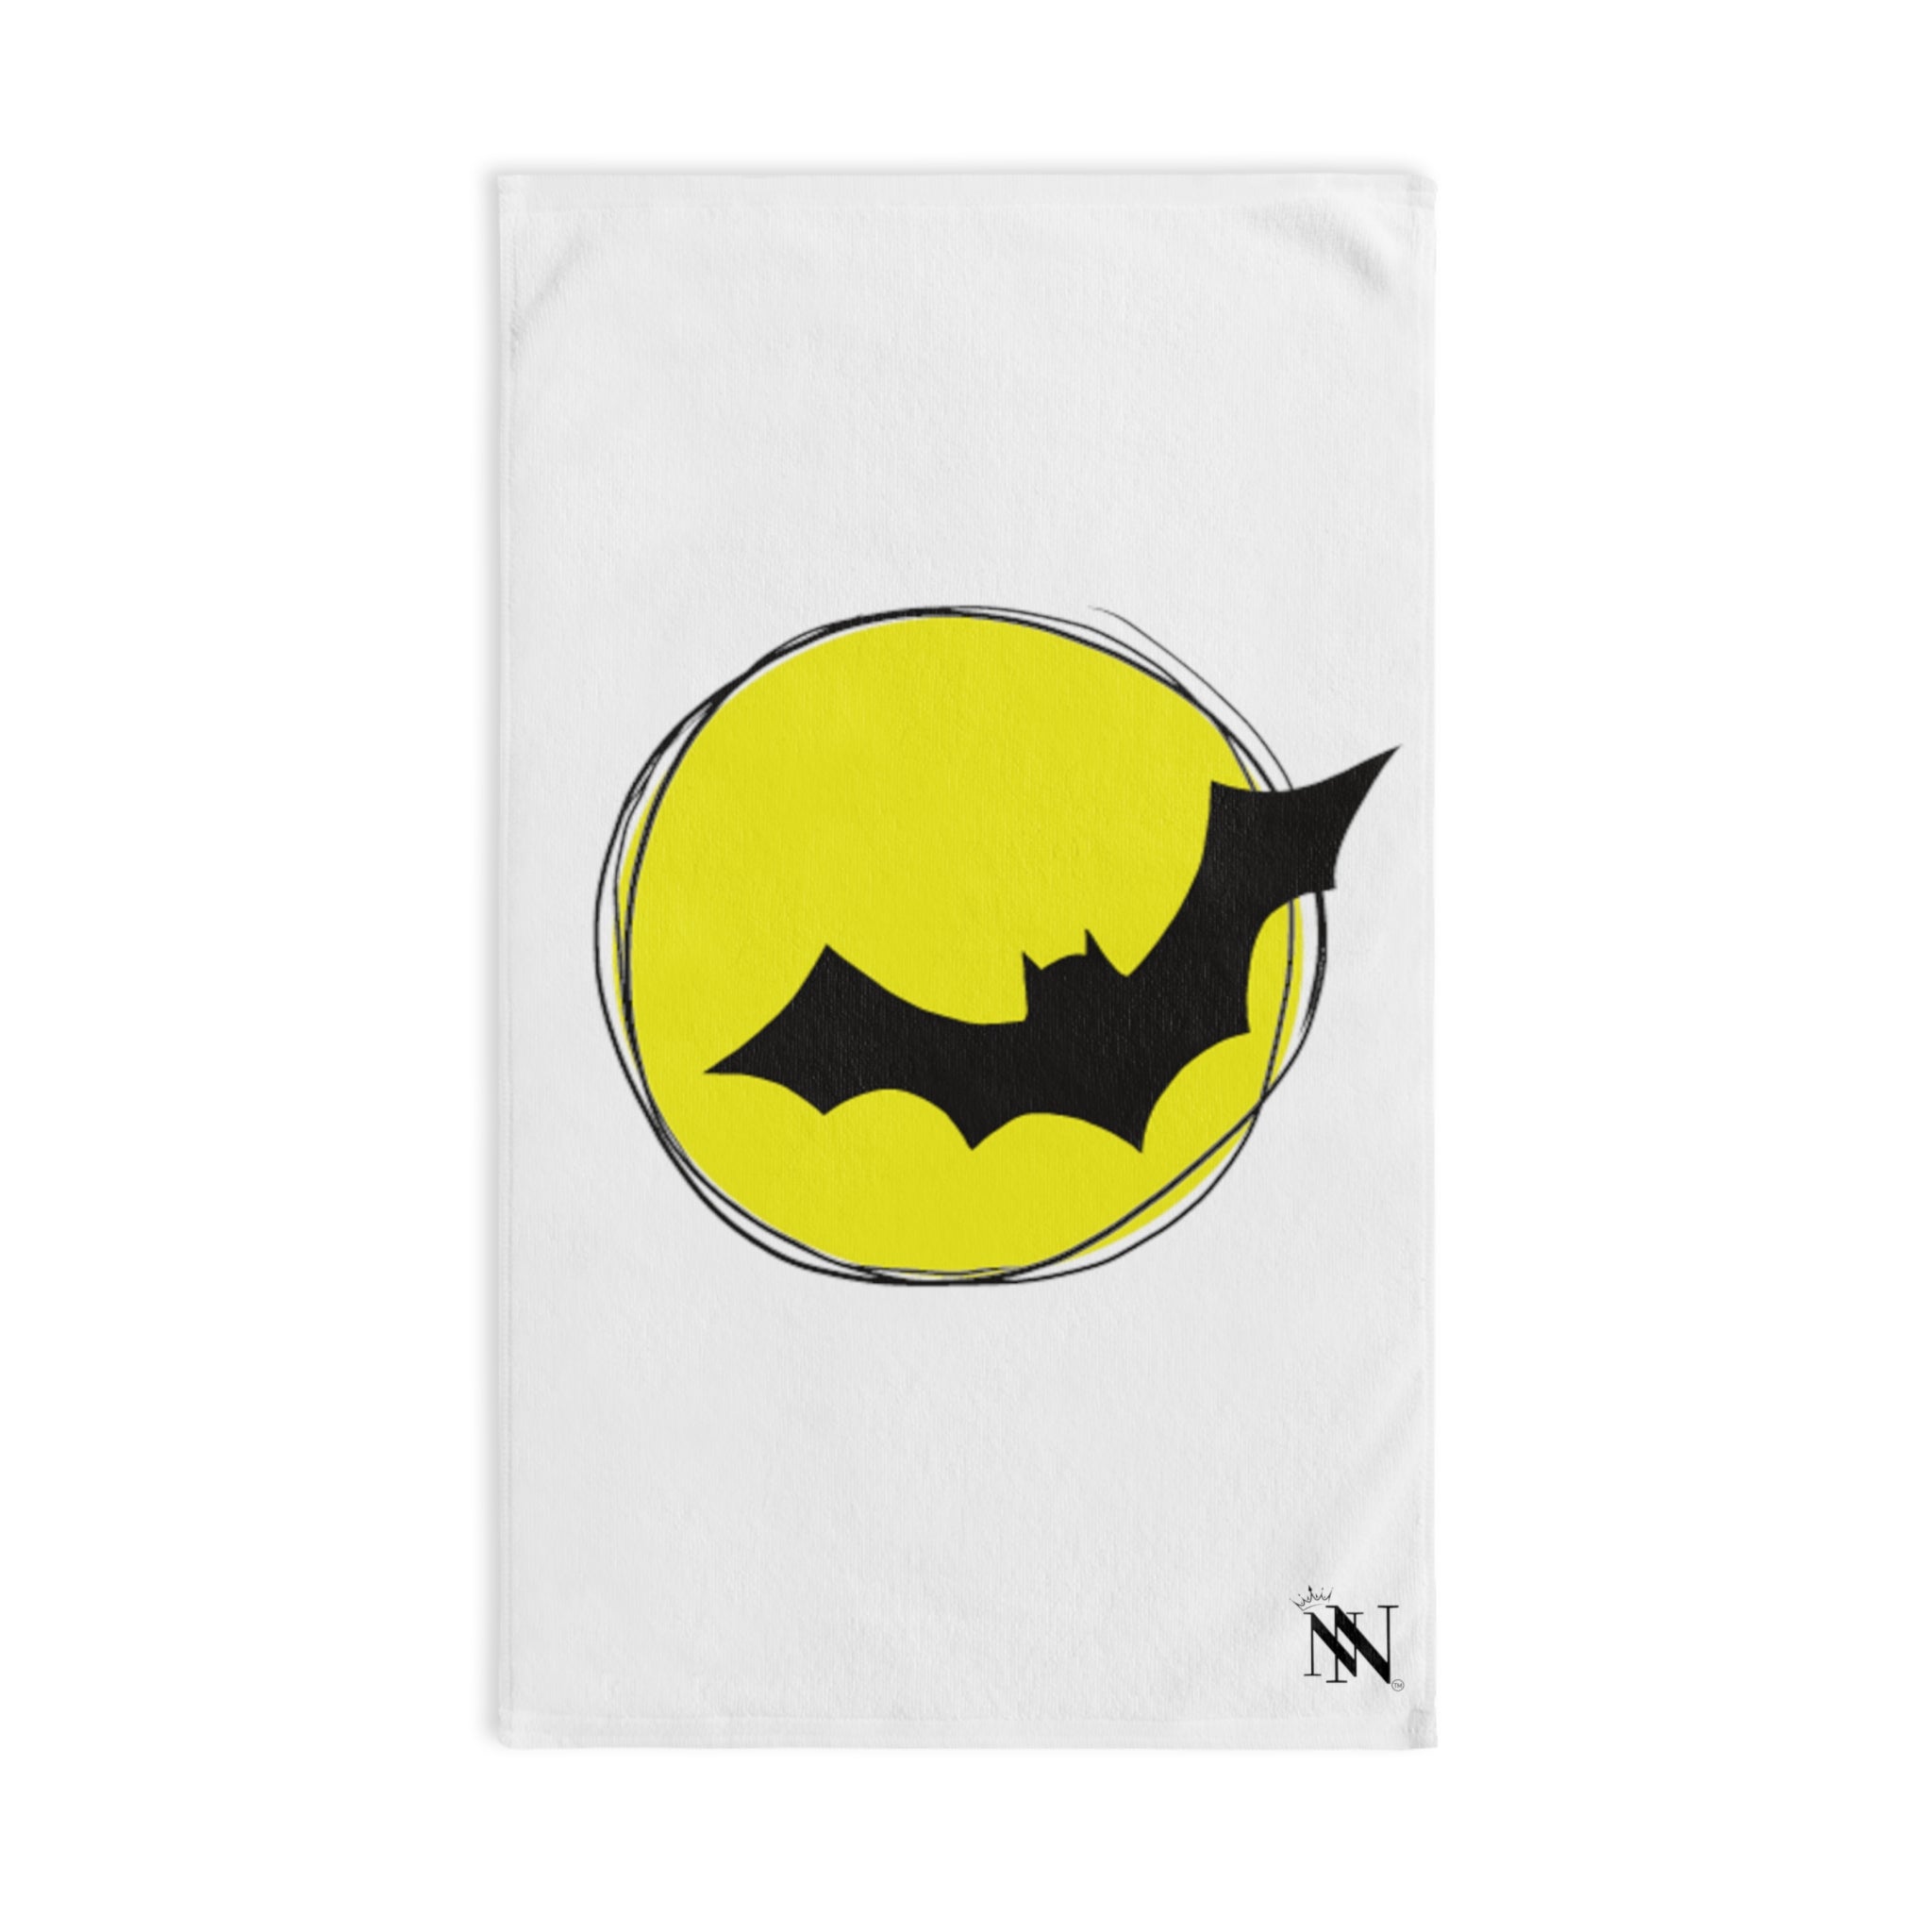 Bat Moon White | Funny Gifts for Men - Gifts for Him - Birthday Gifts for Men, Him, Her, Husband, Boyfriend, Girlfriend, New Couple Gifts, Fathers & Valentines Day Gifts, Christmas Gifts NECTAR NAPKINS